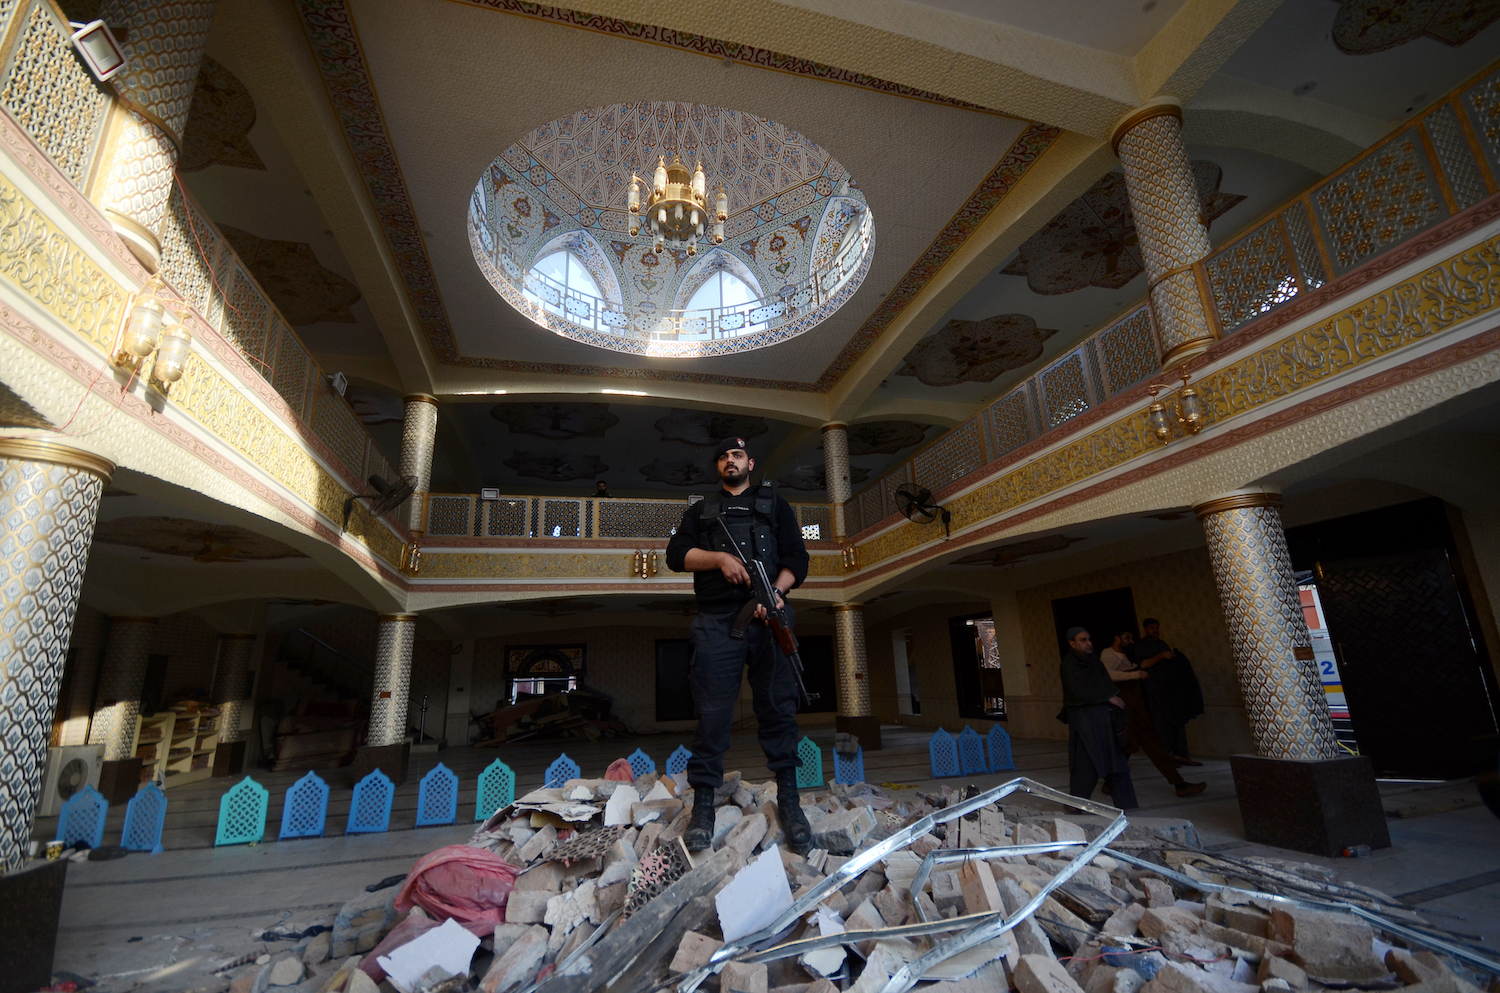 pakistan police standing on the debris in the mosque holding a gun